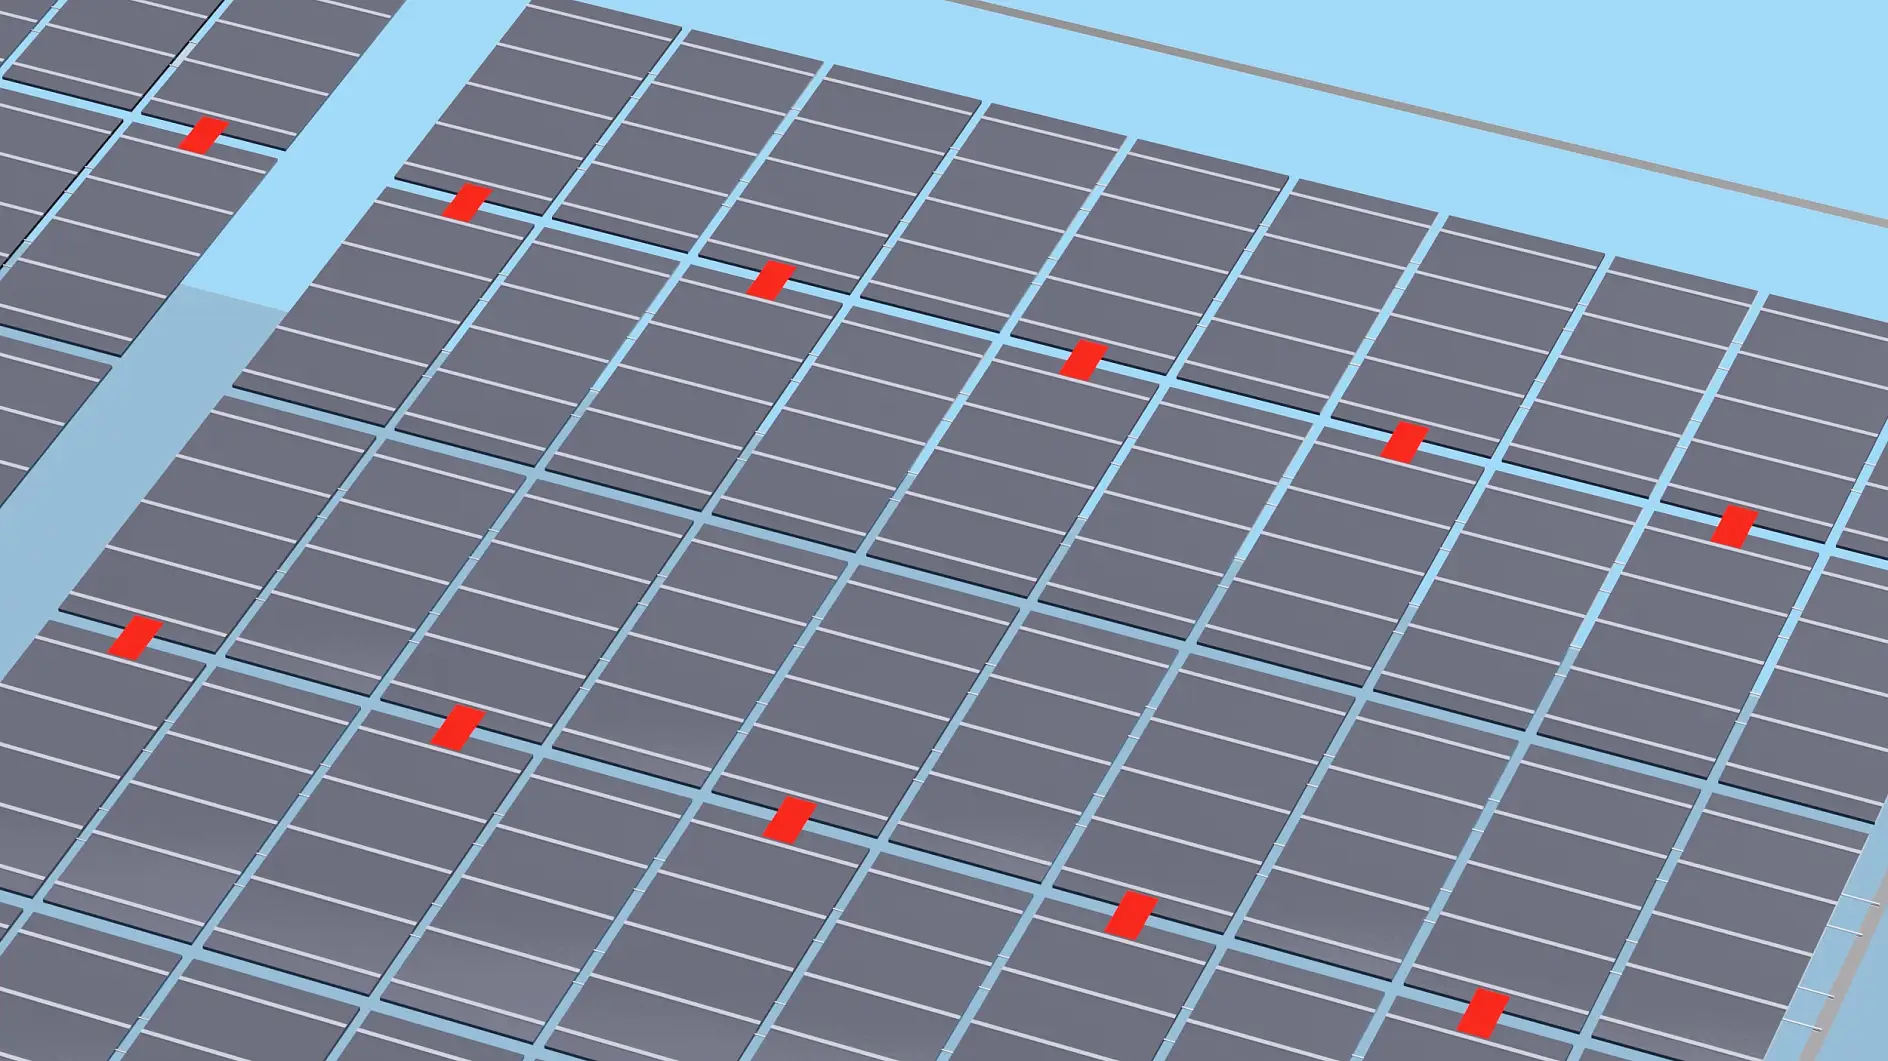 Cell fixation - 1st generation solar module